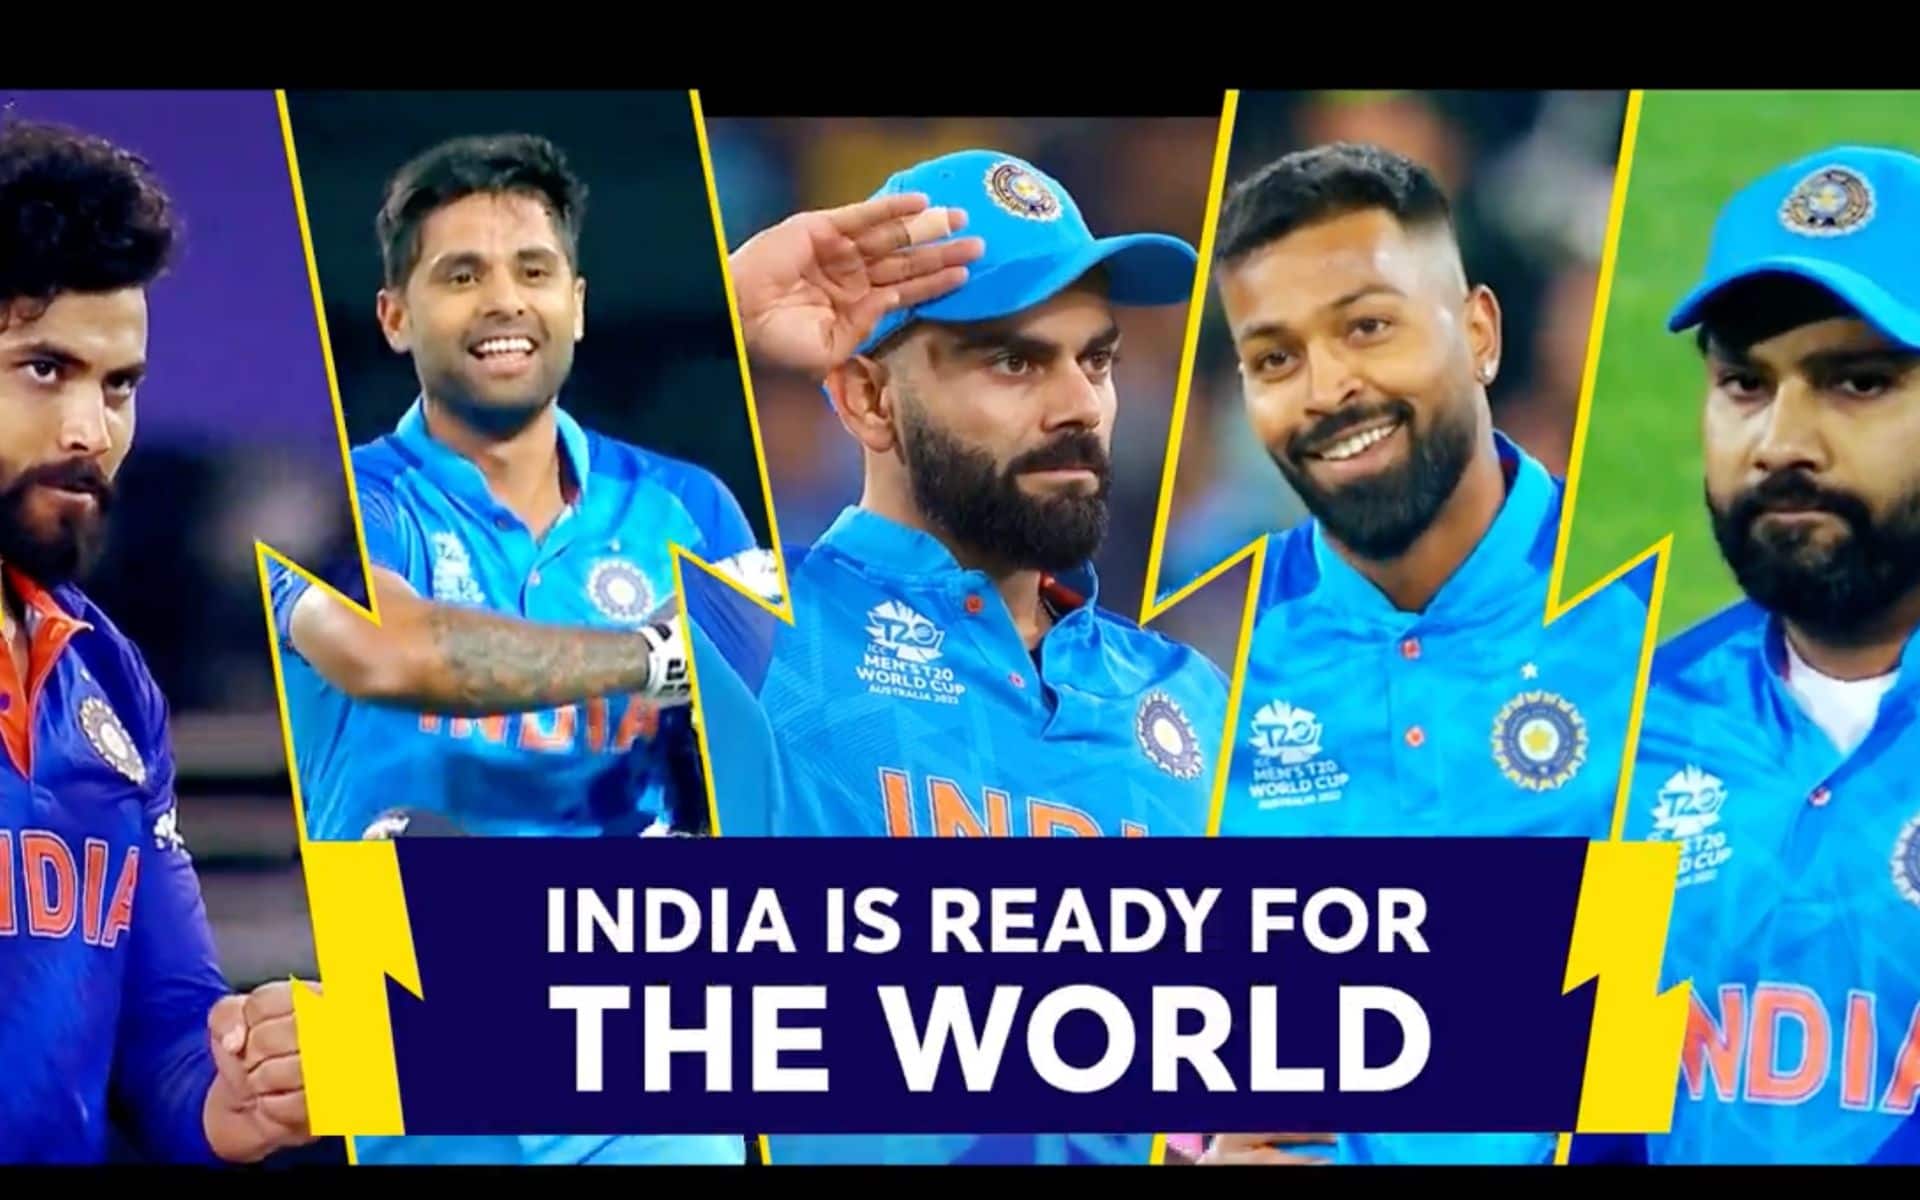 Star Sport's promo for India ahead of T20 WC (X.com)